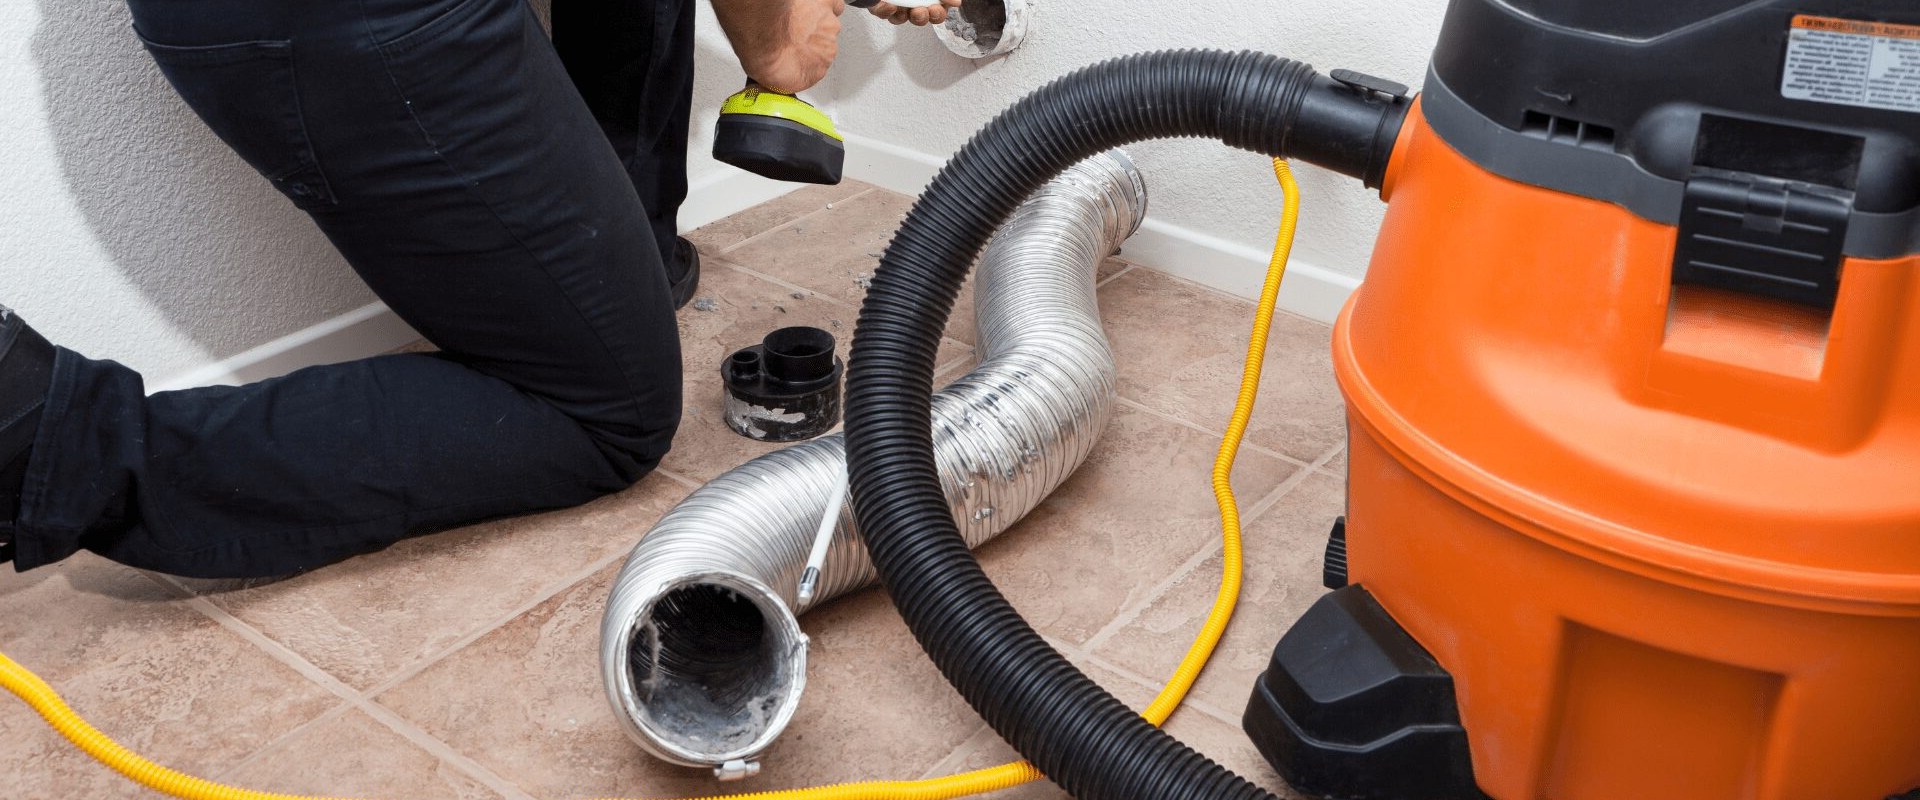 4 Reasons to Clean Your Dryer Vents Professionally